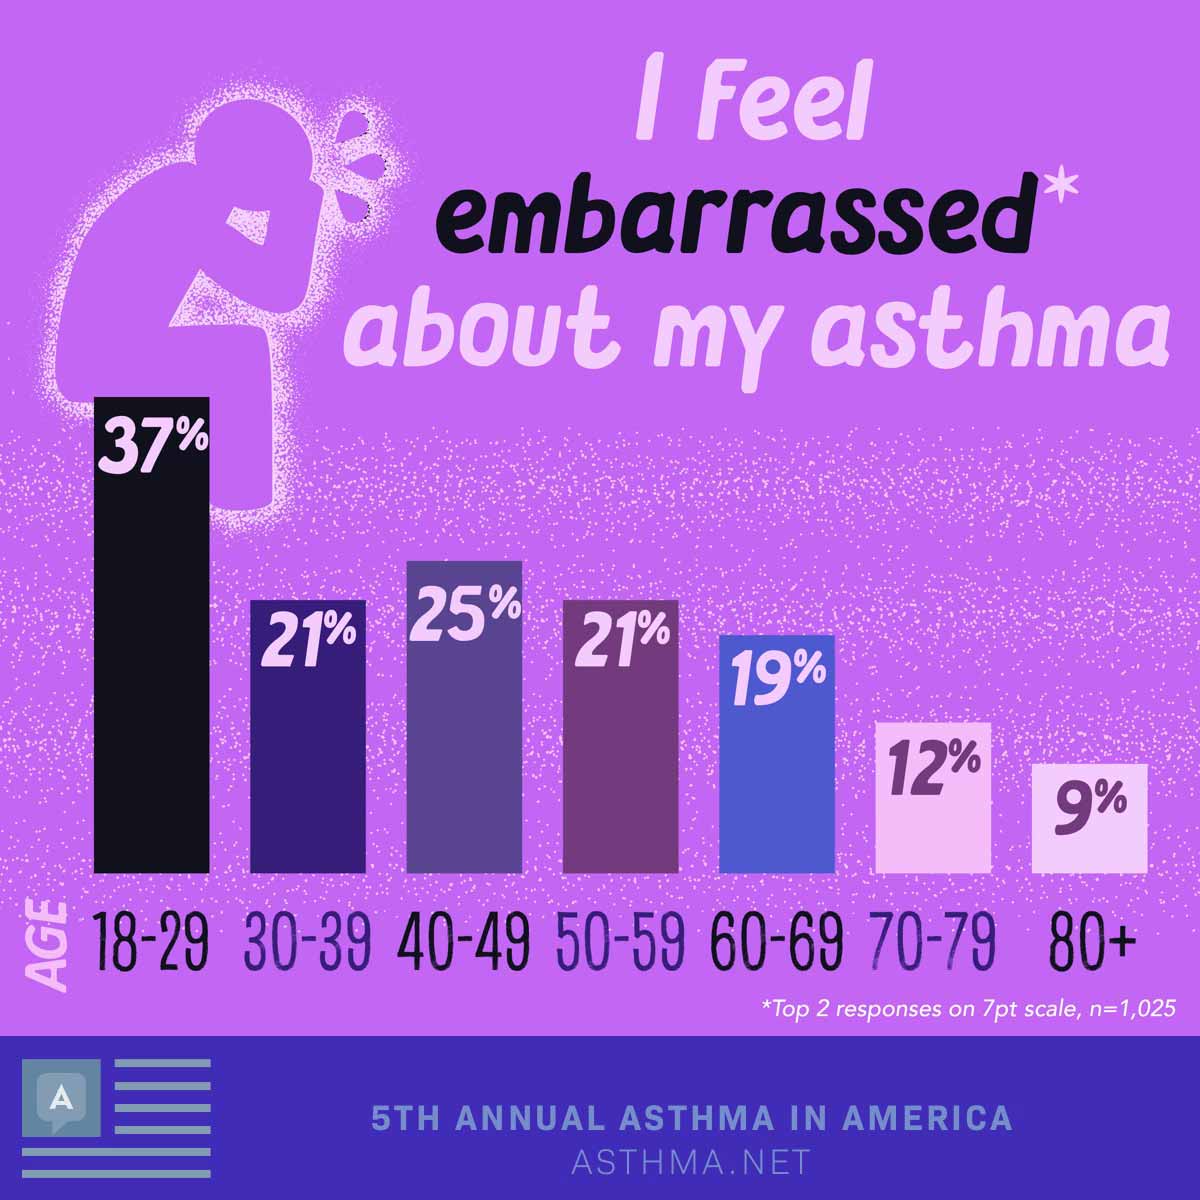 I feel embarrassed* about my asthma. Ages18-29: 37%30-39: 21%40-49: 25%50-59: 21%60-69: 19%70-79: 12%80+: 9%